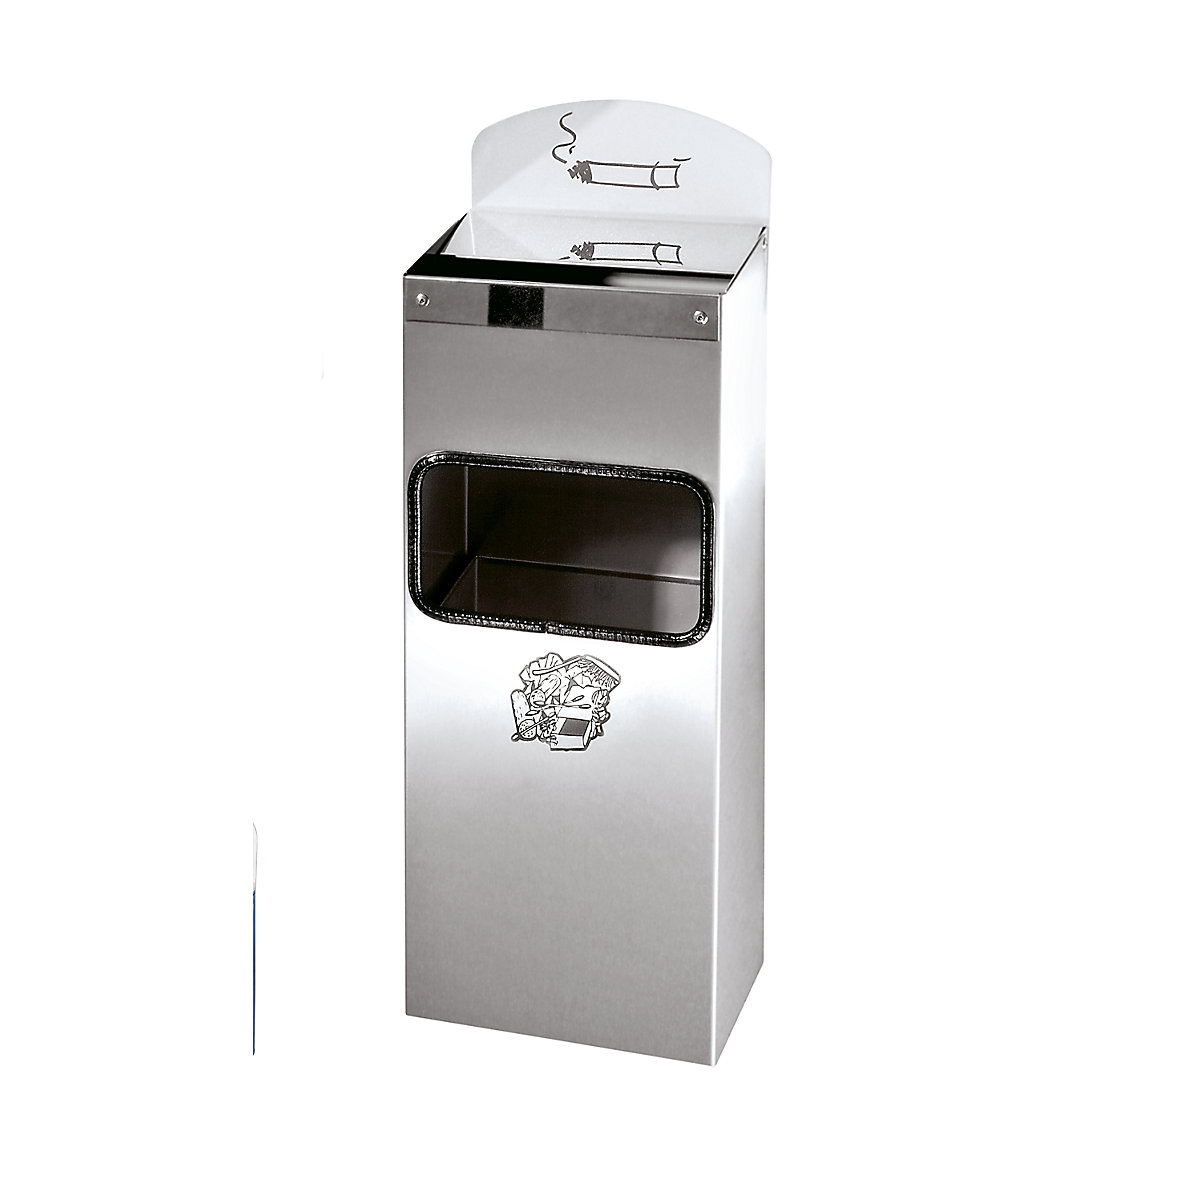 VAR – Combination wall ashtray with waste disposal, HxWxD 505 x 200 x 125 mm, stainless steel